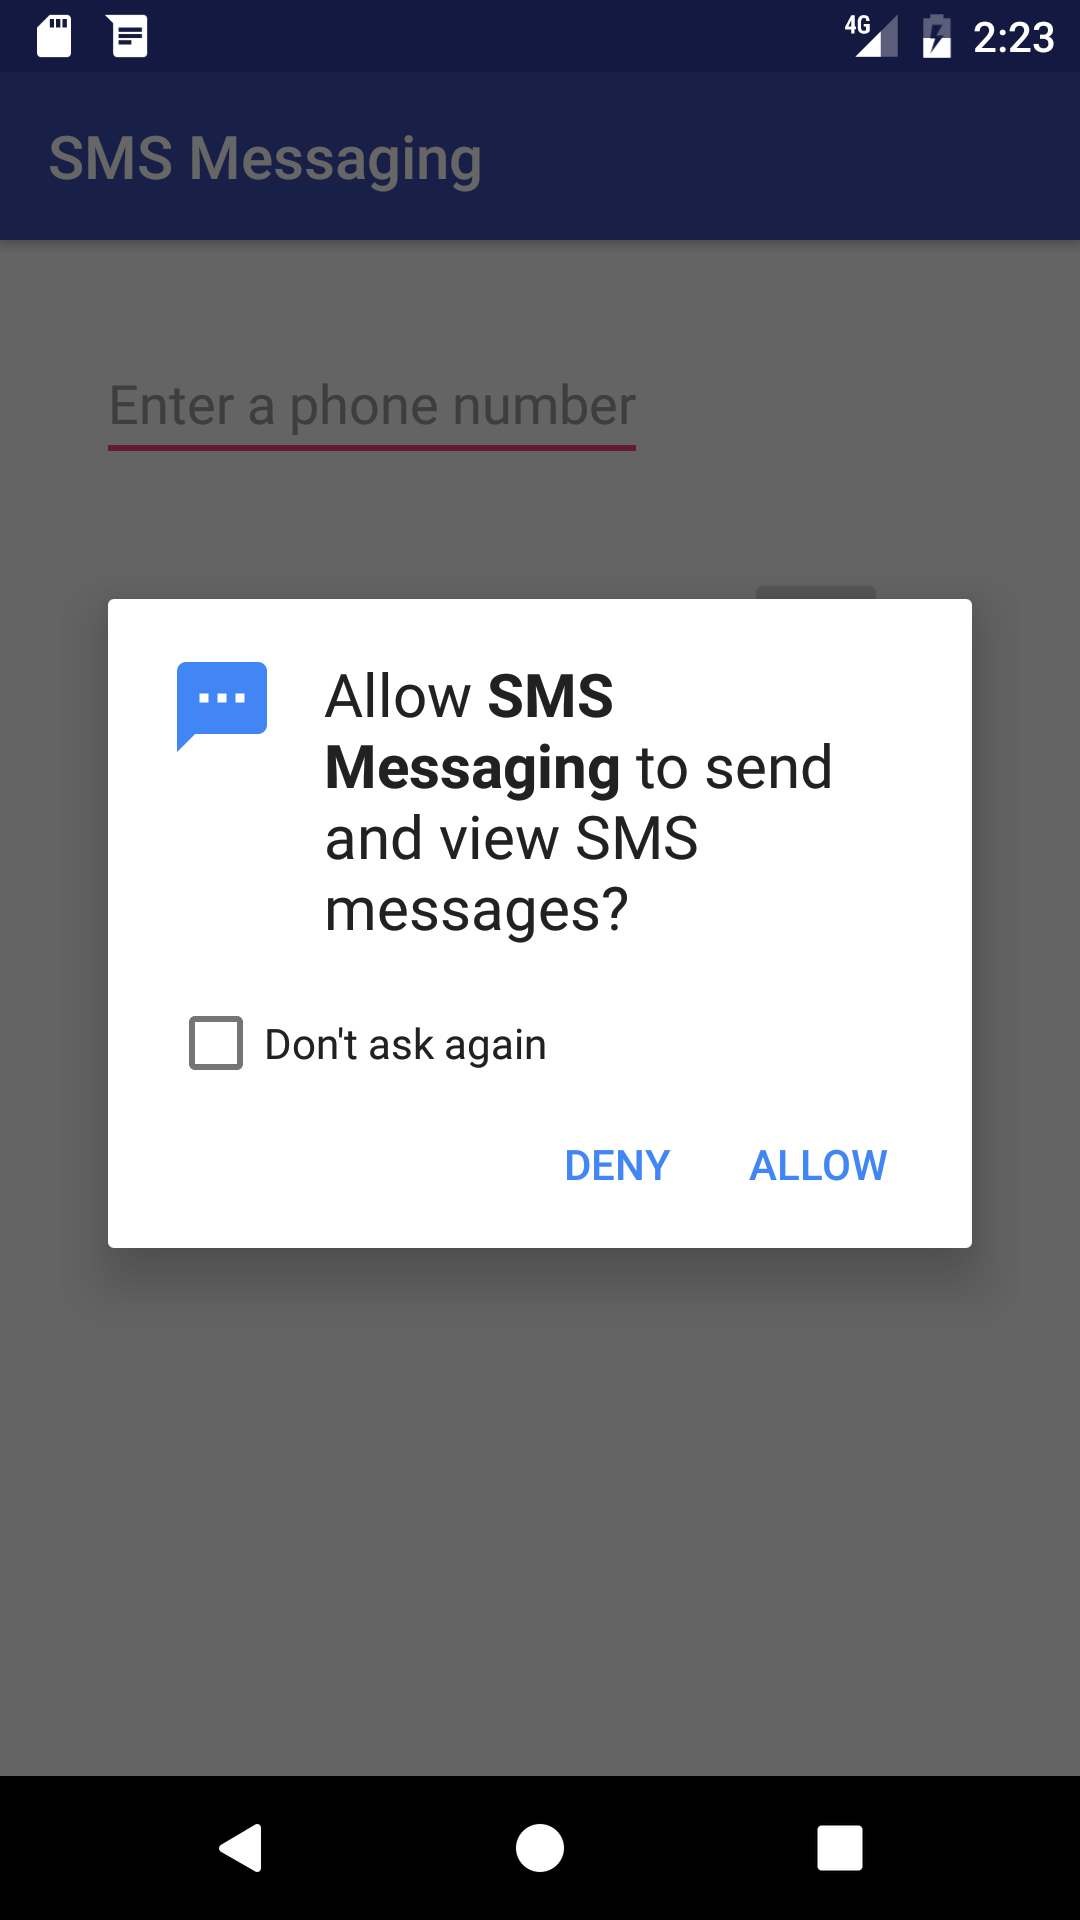 Requesting permission to send and view SMS messages